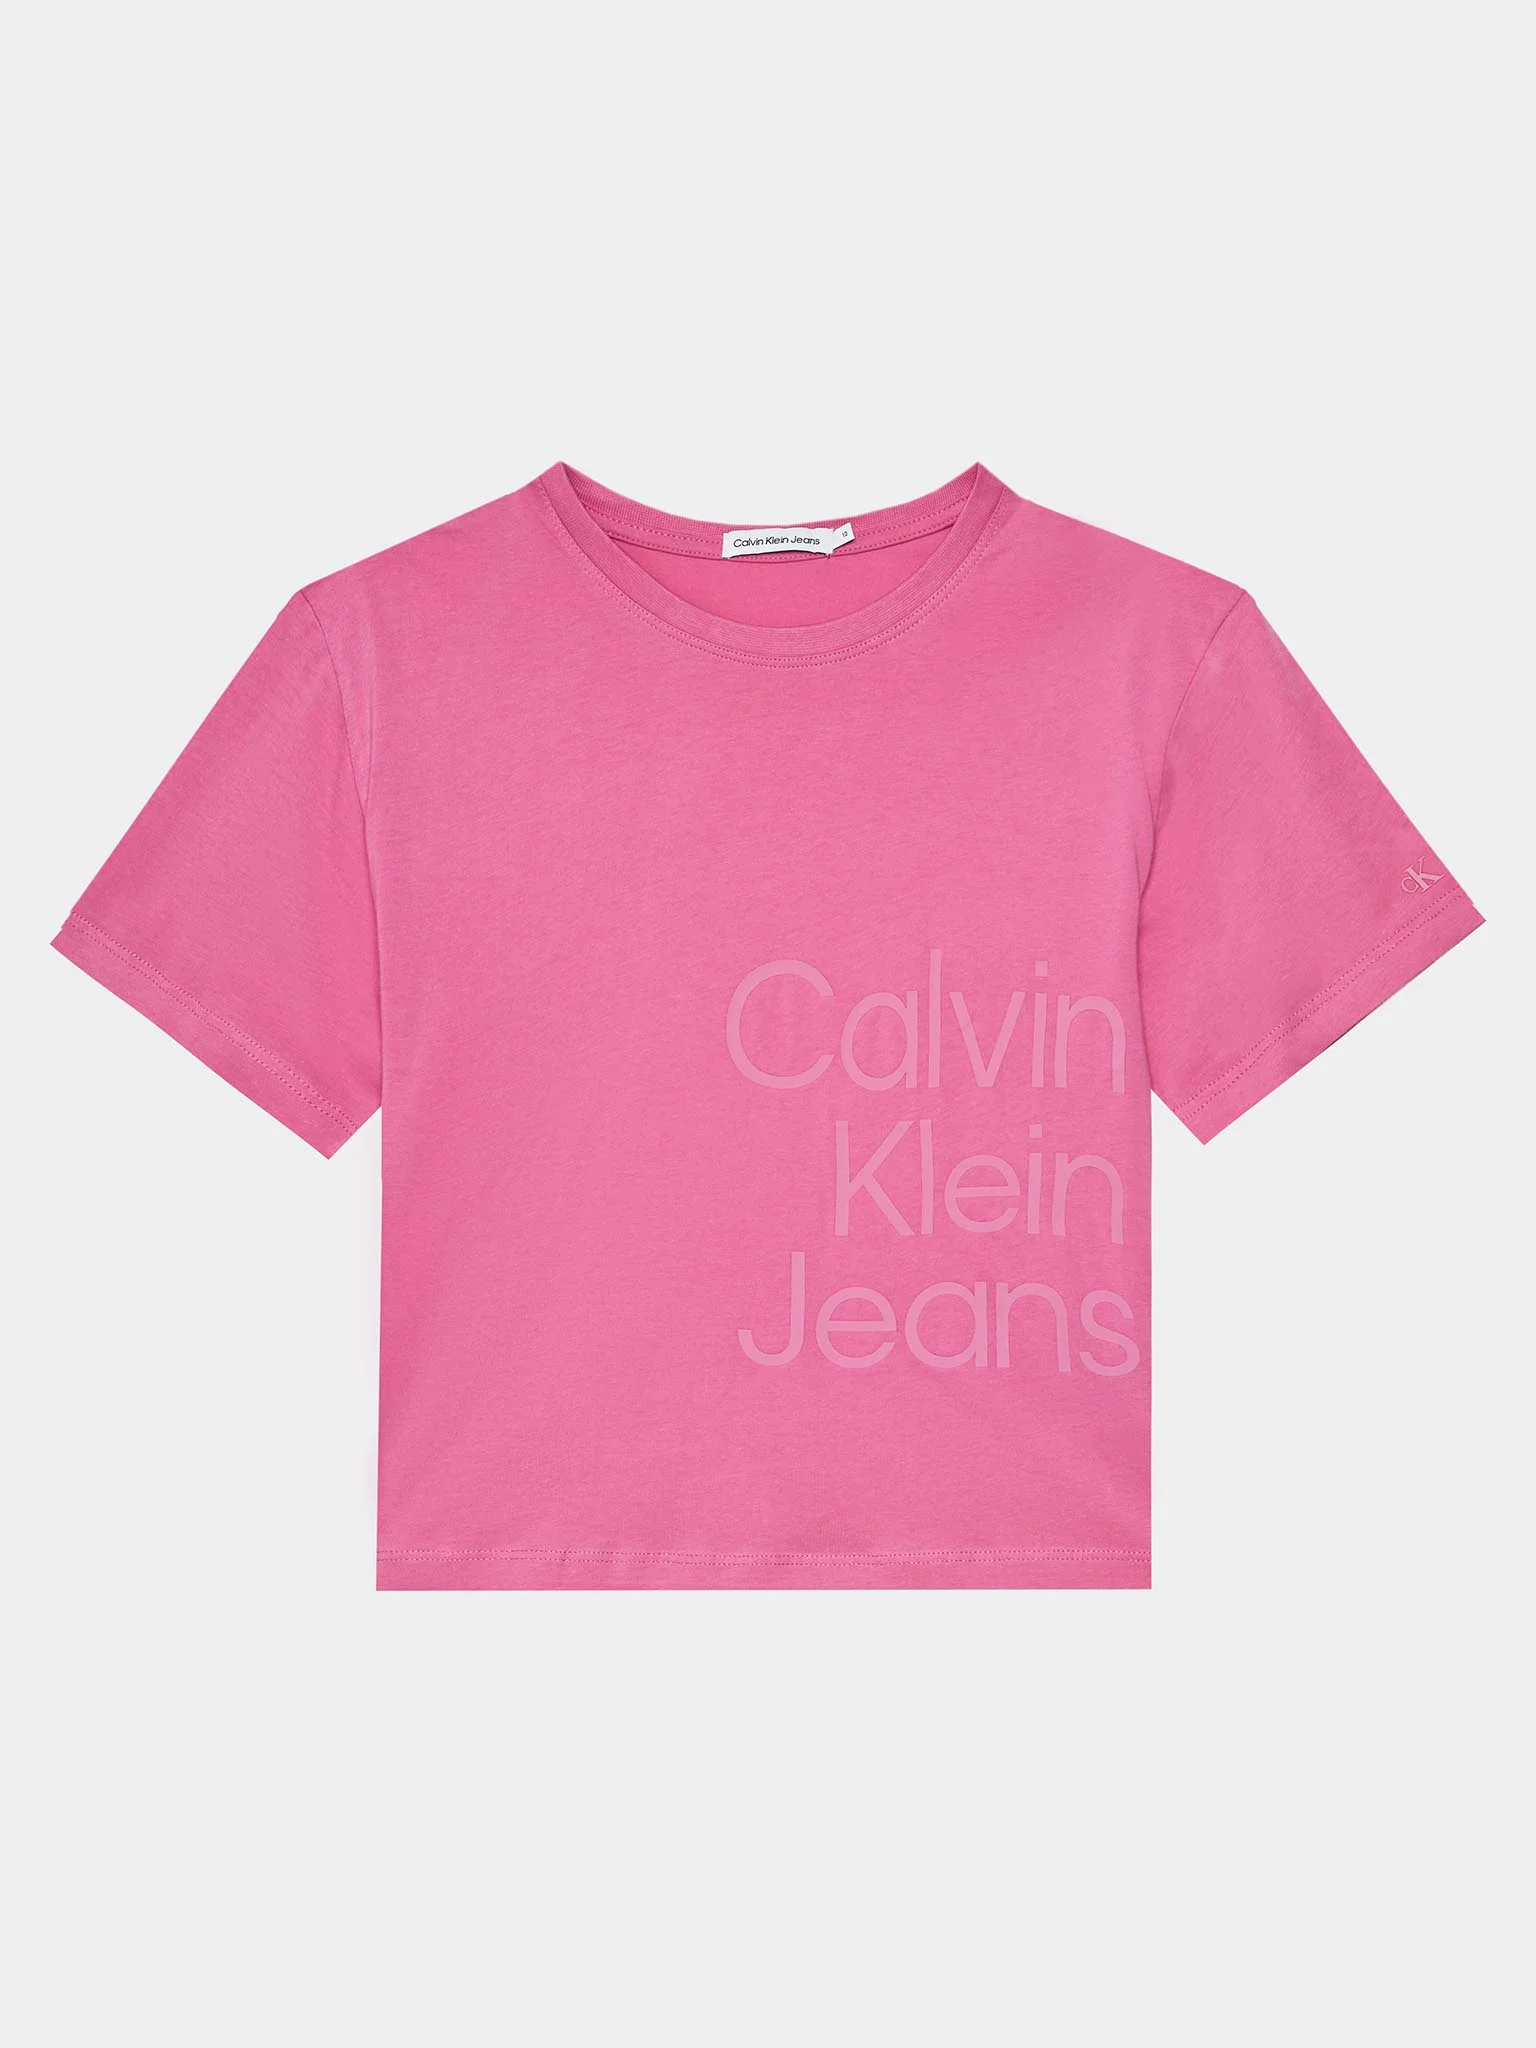 calvin-klein-jeans-t-shirt-hero-logo-ig0ig02346-rosa-relaxed-fit-0000303102814